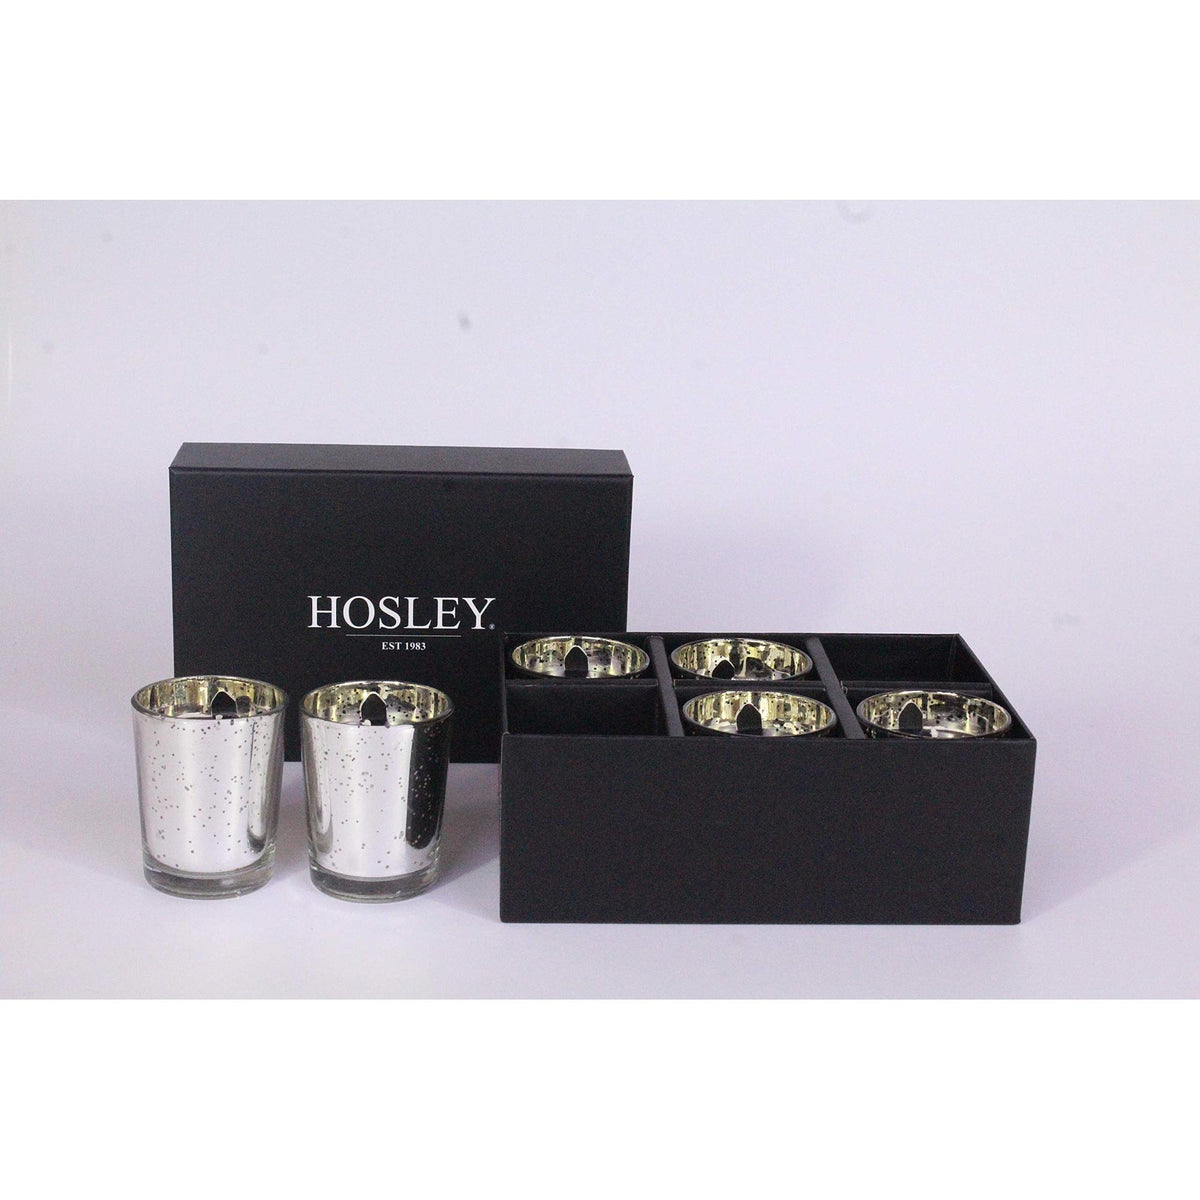 HOSLEY®  Silver Metallic Glass Filled Assorted Fragrance Votive Candles, Set of 6